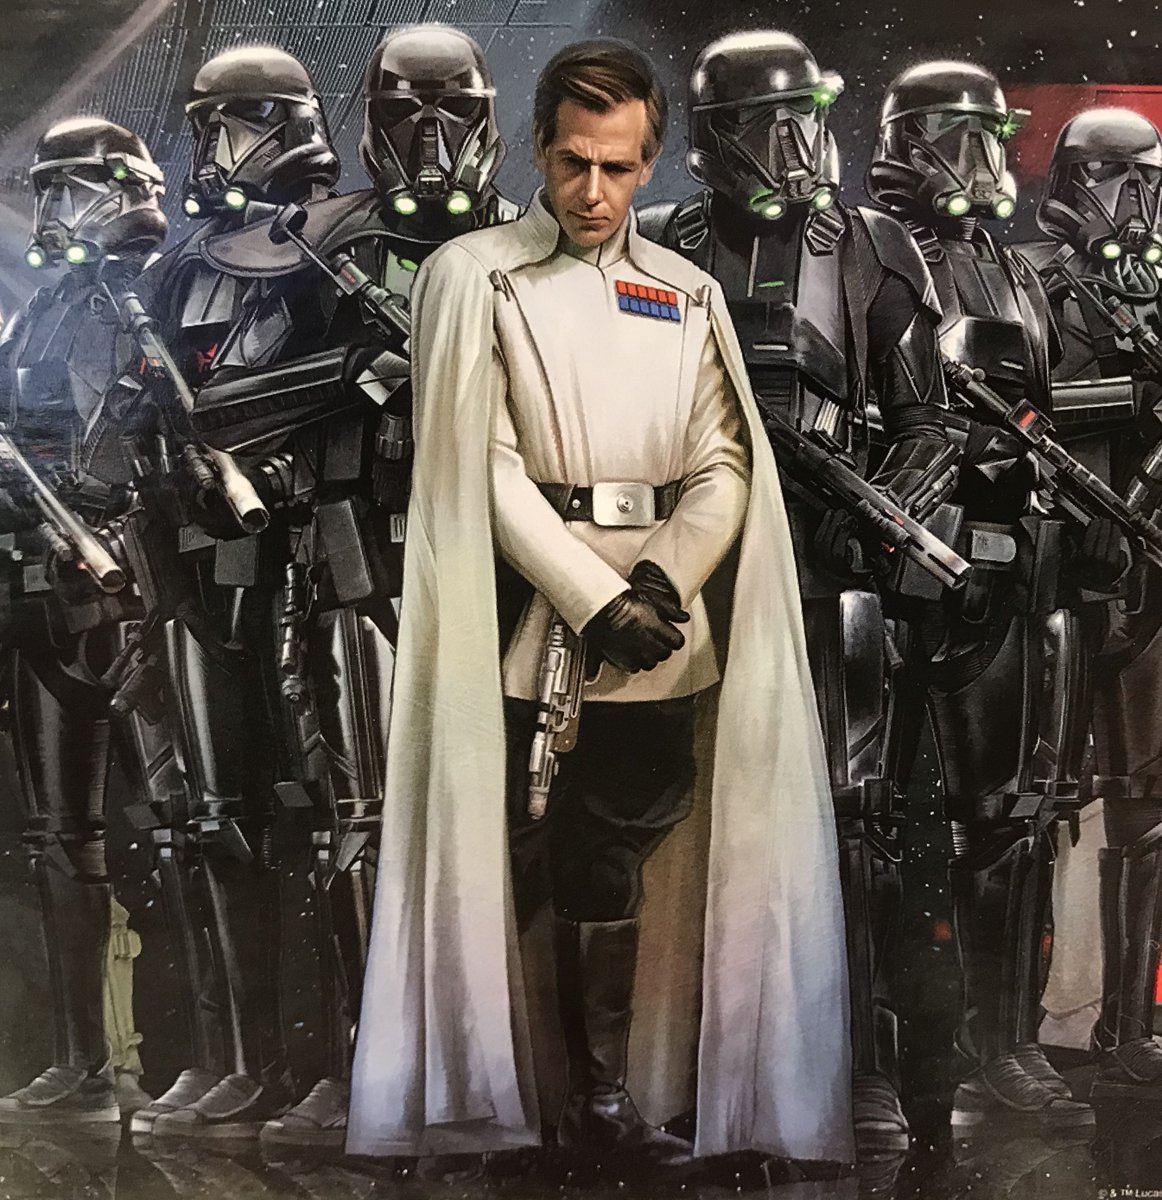 We'll be seeing more about the Initiative later on. What matters is, Krennic appears to love his death trooper guard and goes with them everywhere.Did you know that death troopers were intended to look good next to Krennic, like a reverse of Vader and his stormies in ANH?